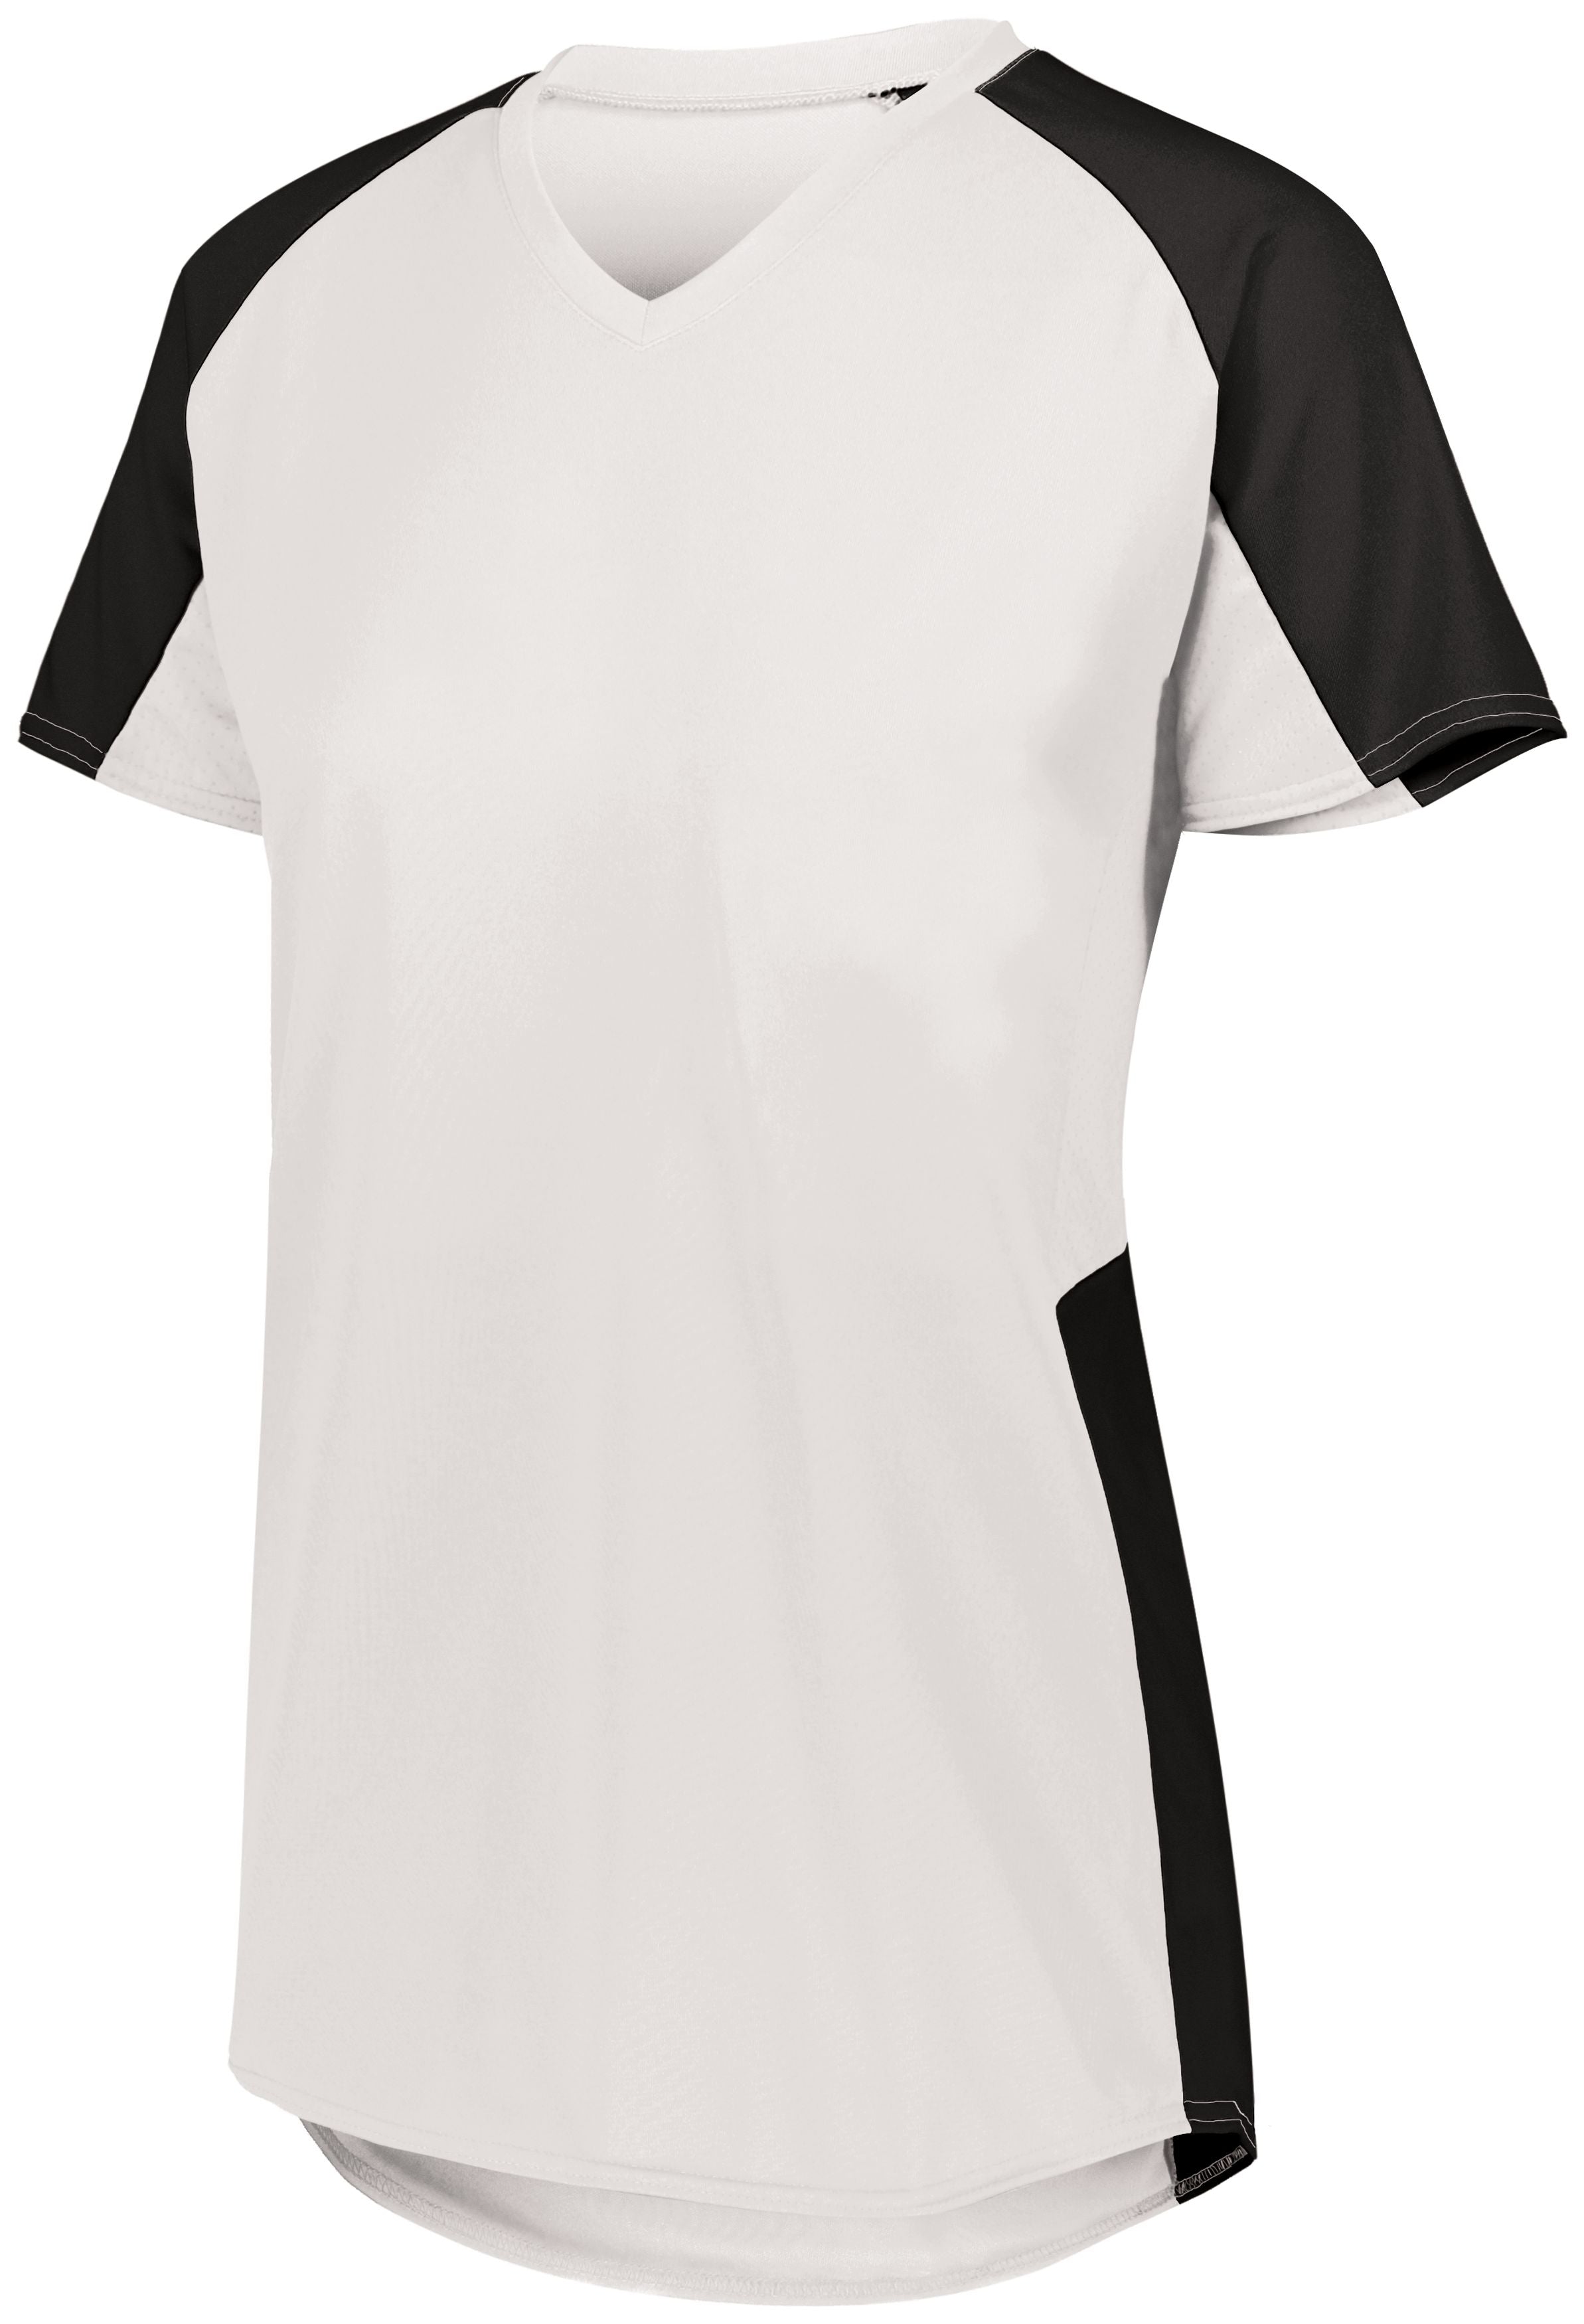 Augusta Sportswear Girls Cutter Jersey in White/Black  -Part of the Girls, Augusta-Products, Softball, Girls-Jersey, Shirts product lines at KanaleyCreations.com